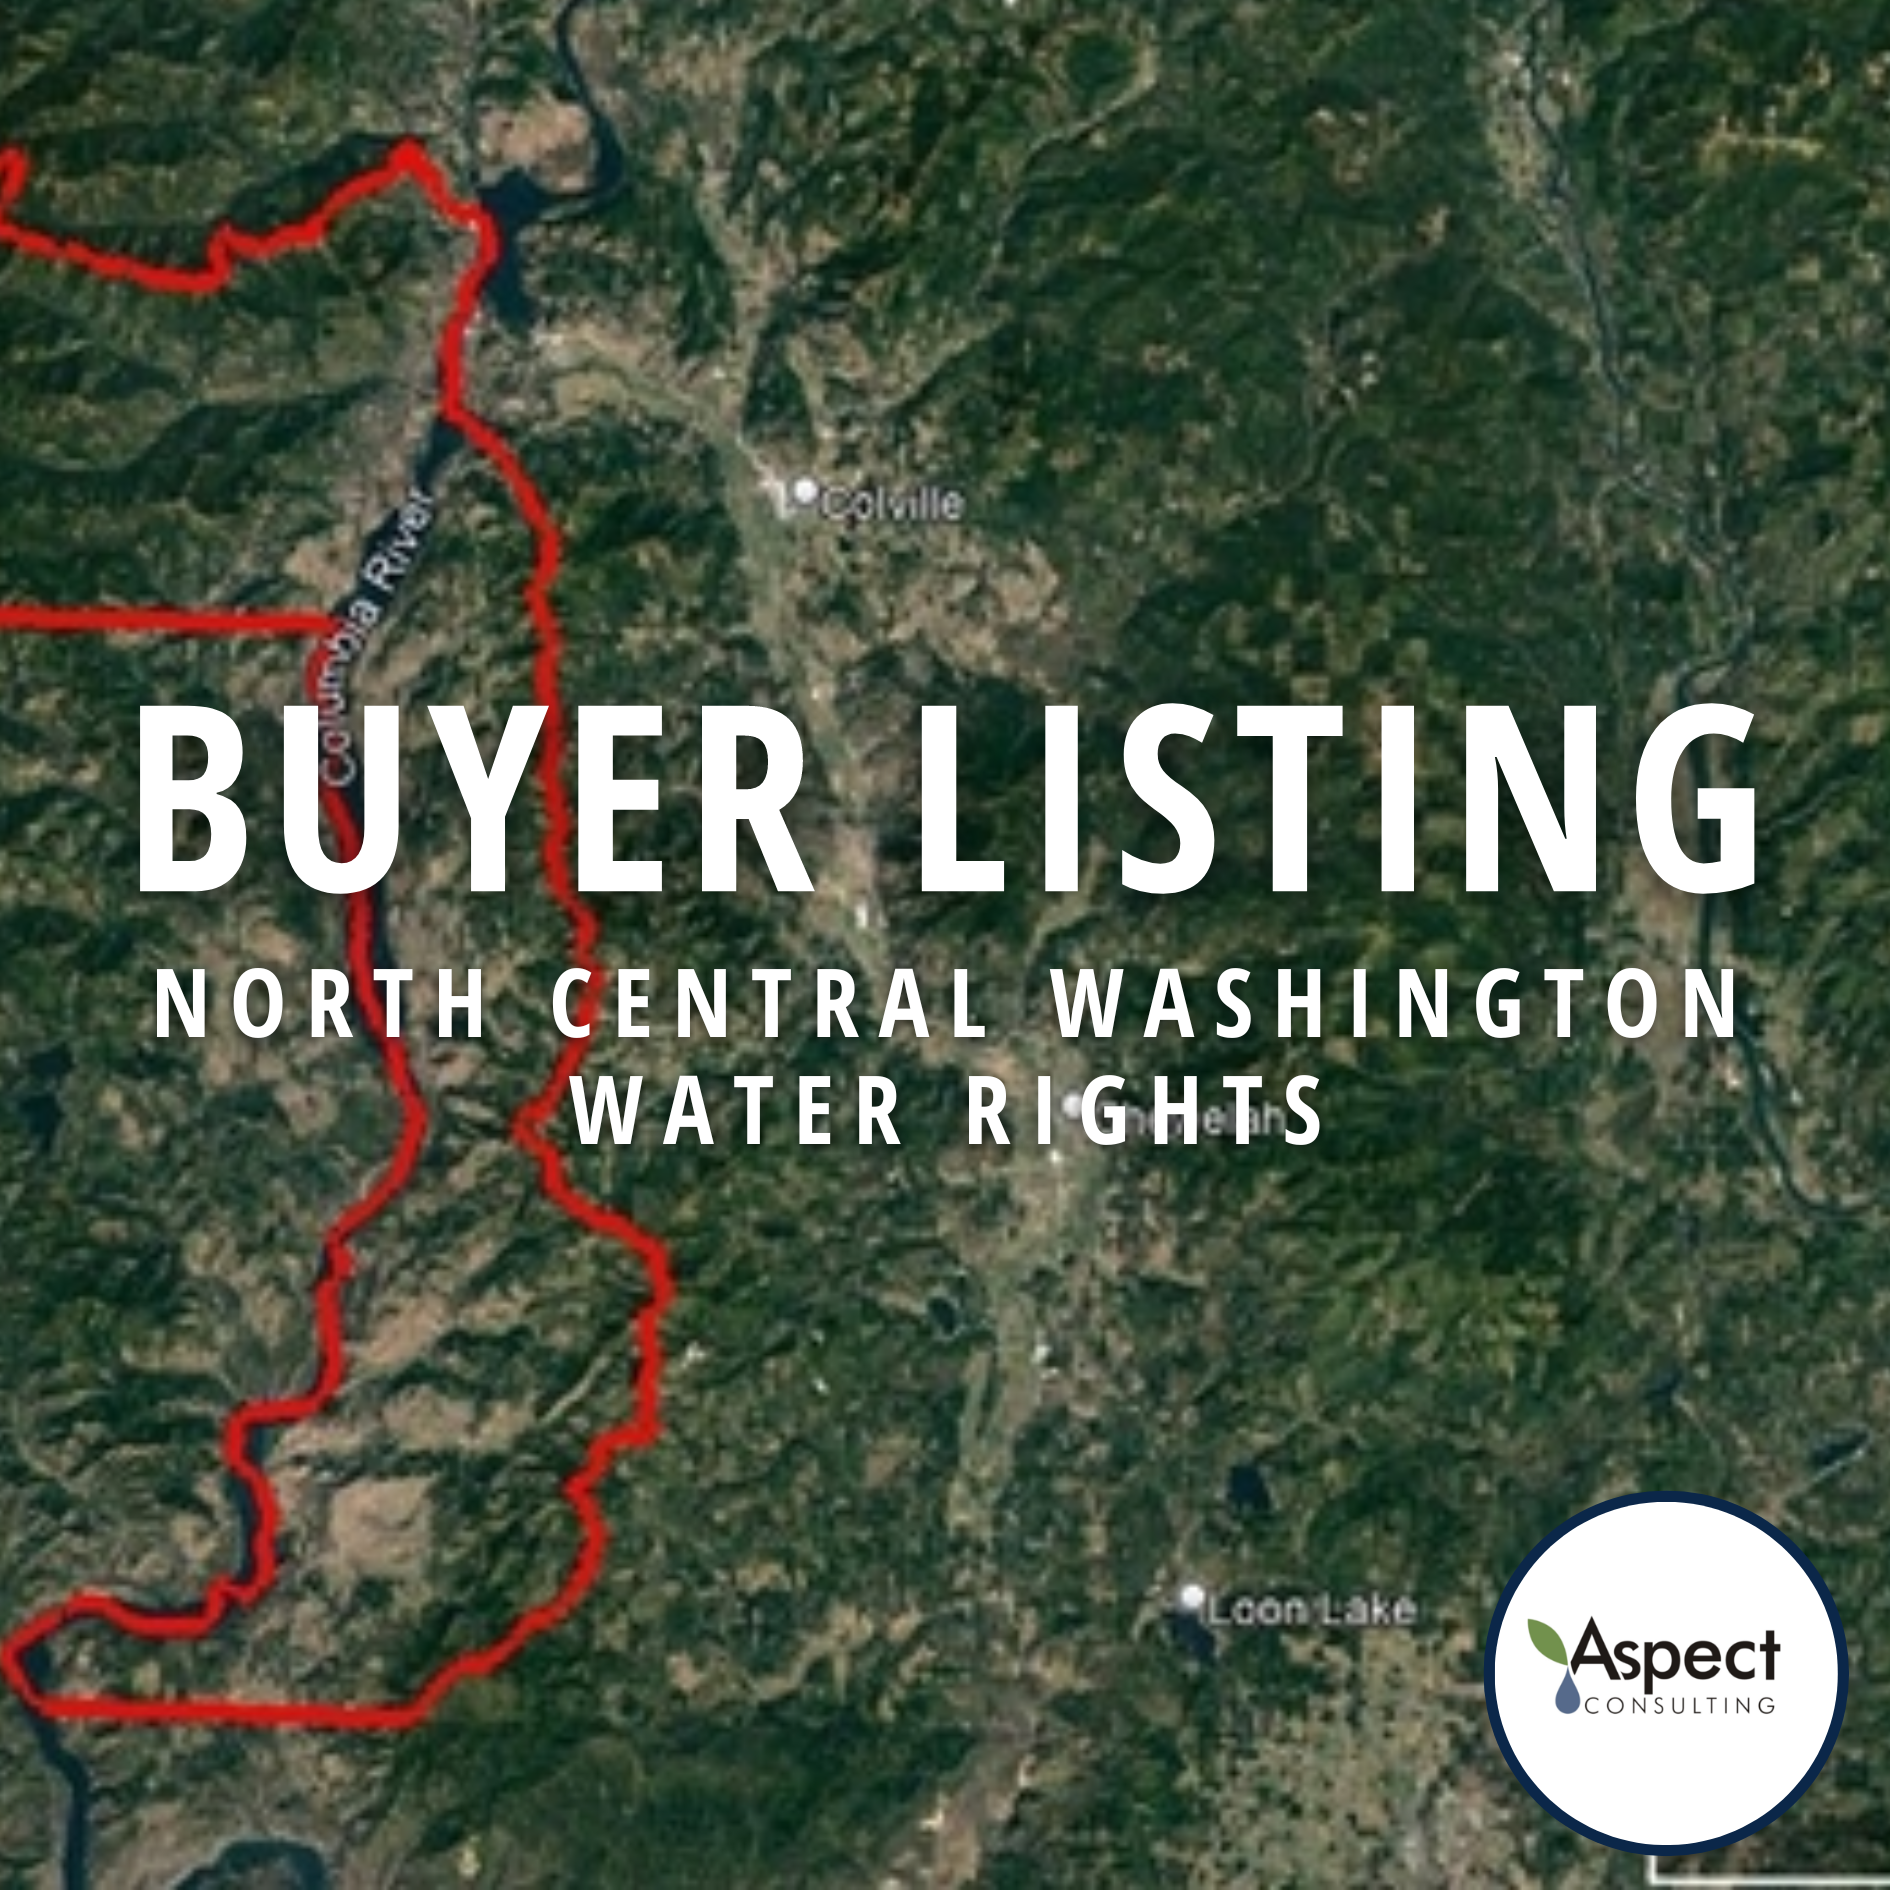 Water Right Buyer North Central Washington - Aspect Consulting